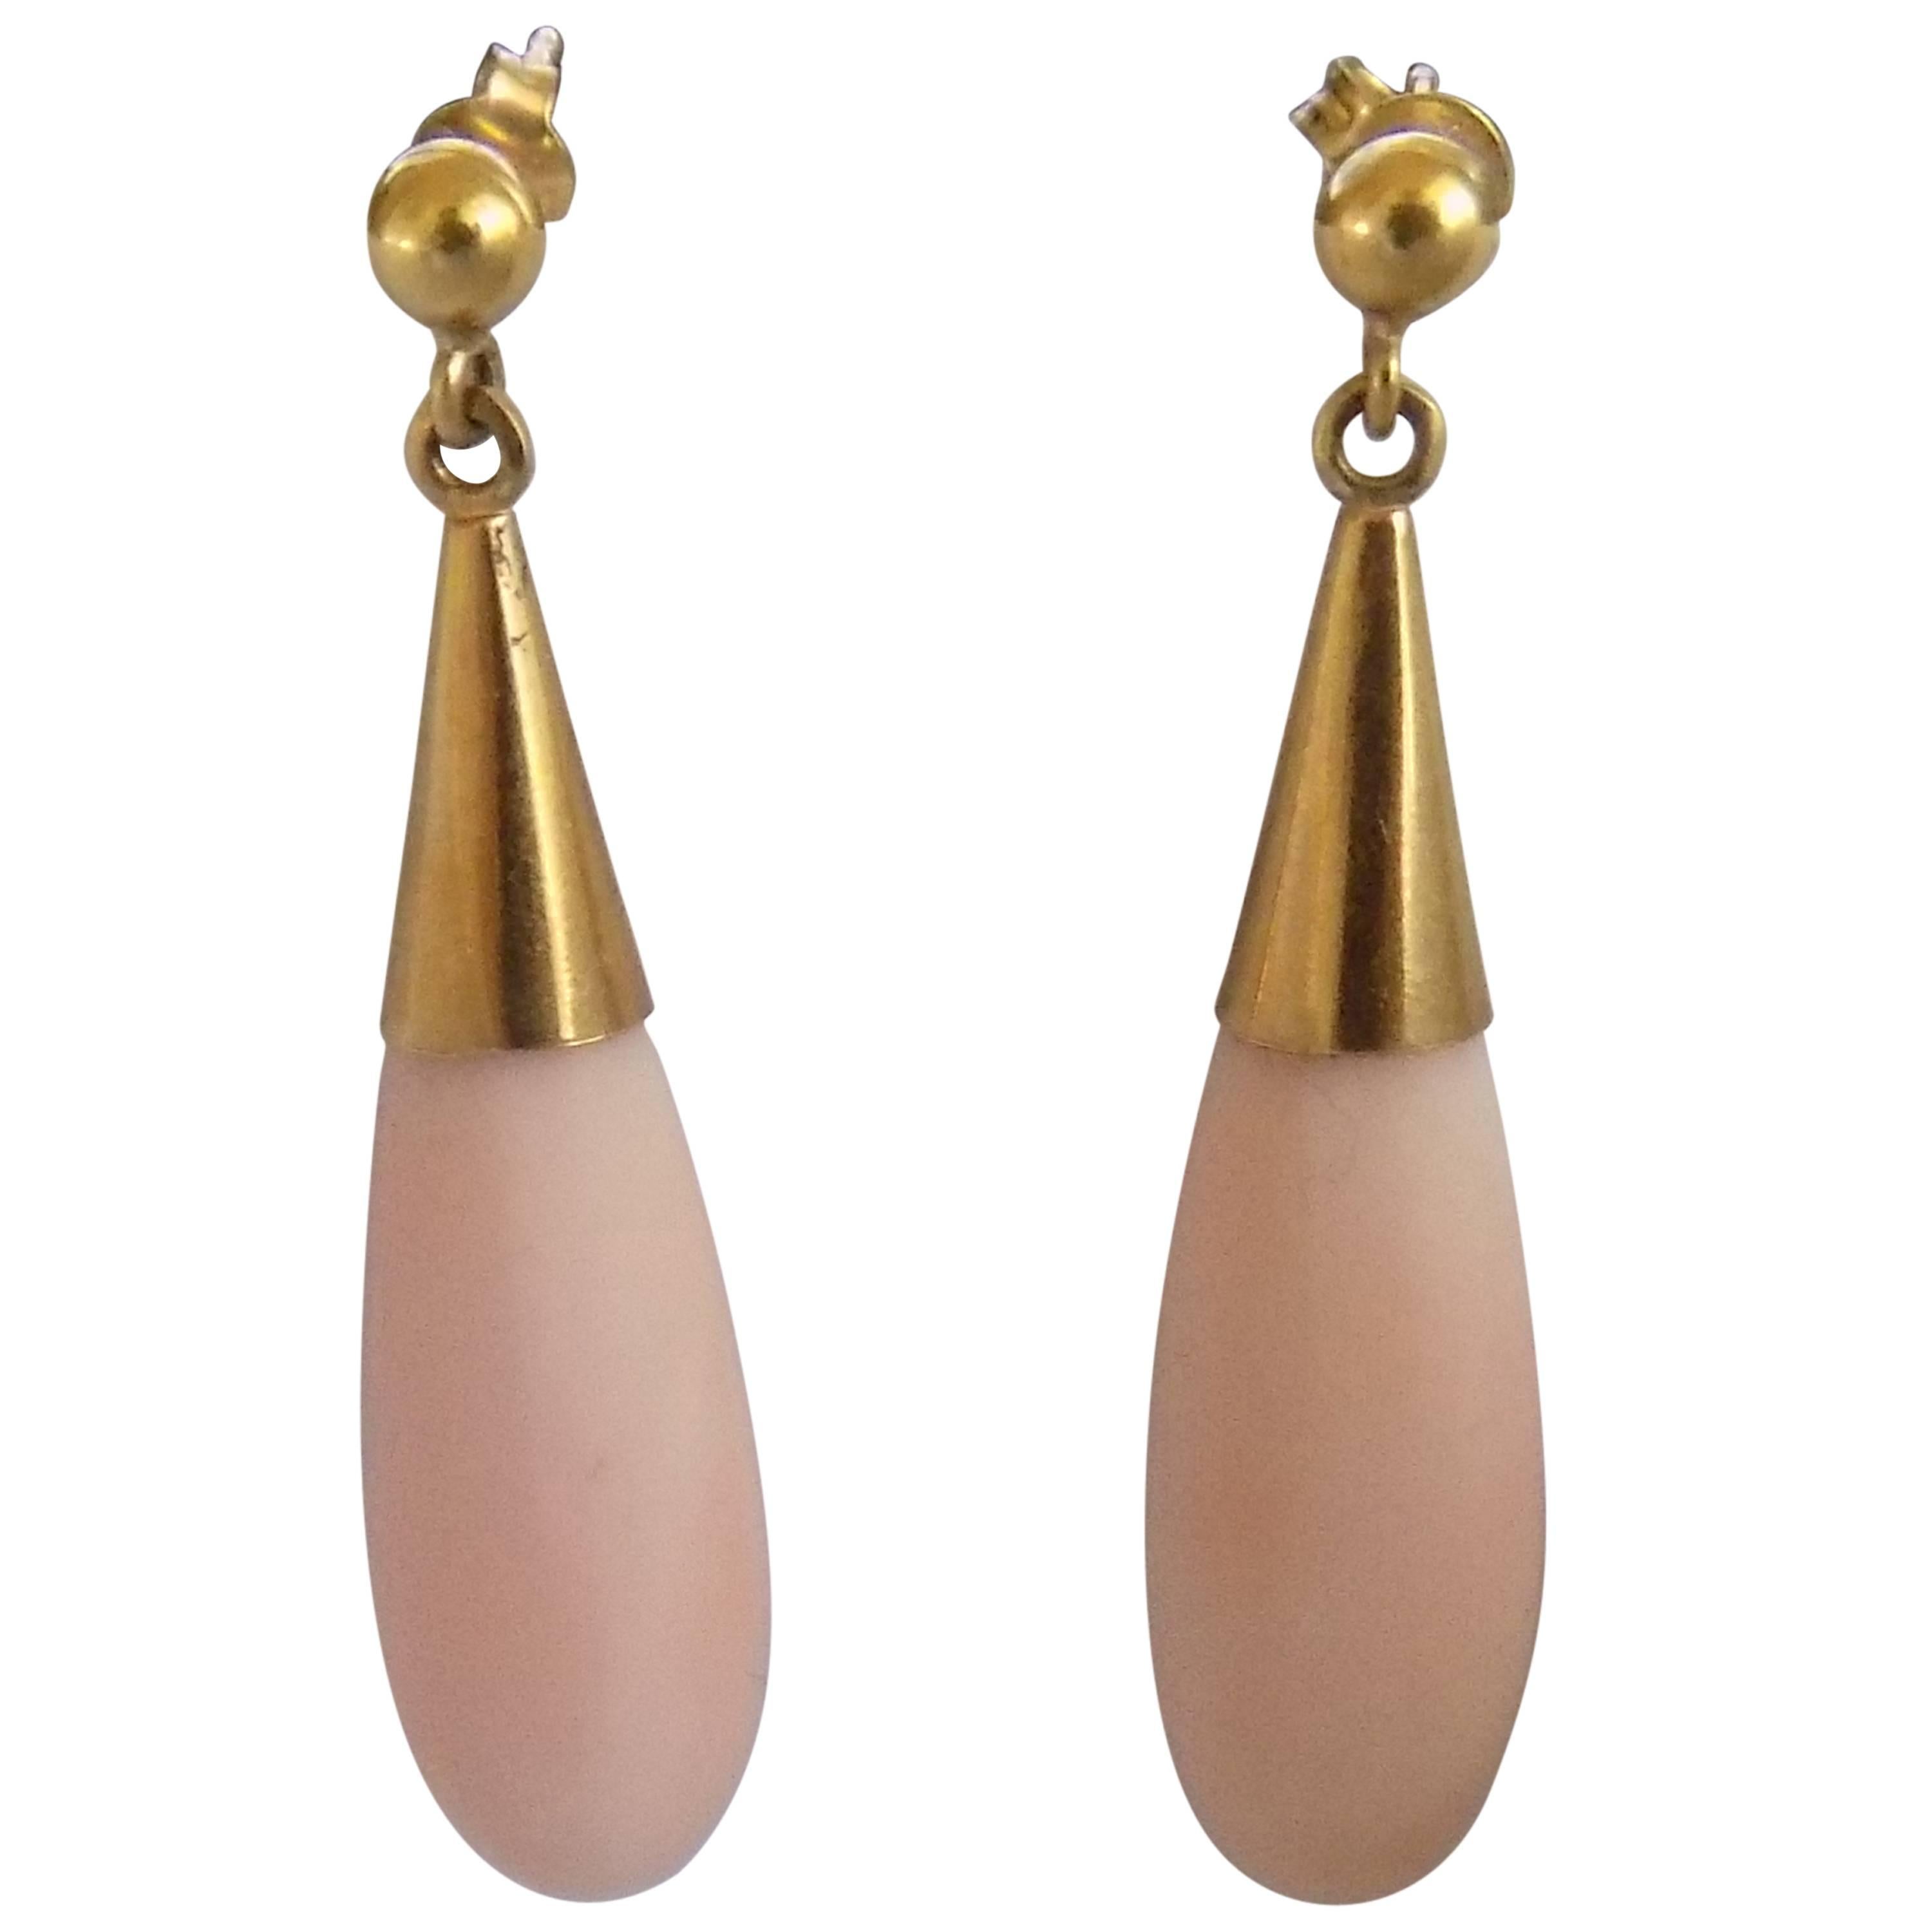 18kt Gold Pink Coral Earrings